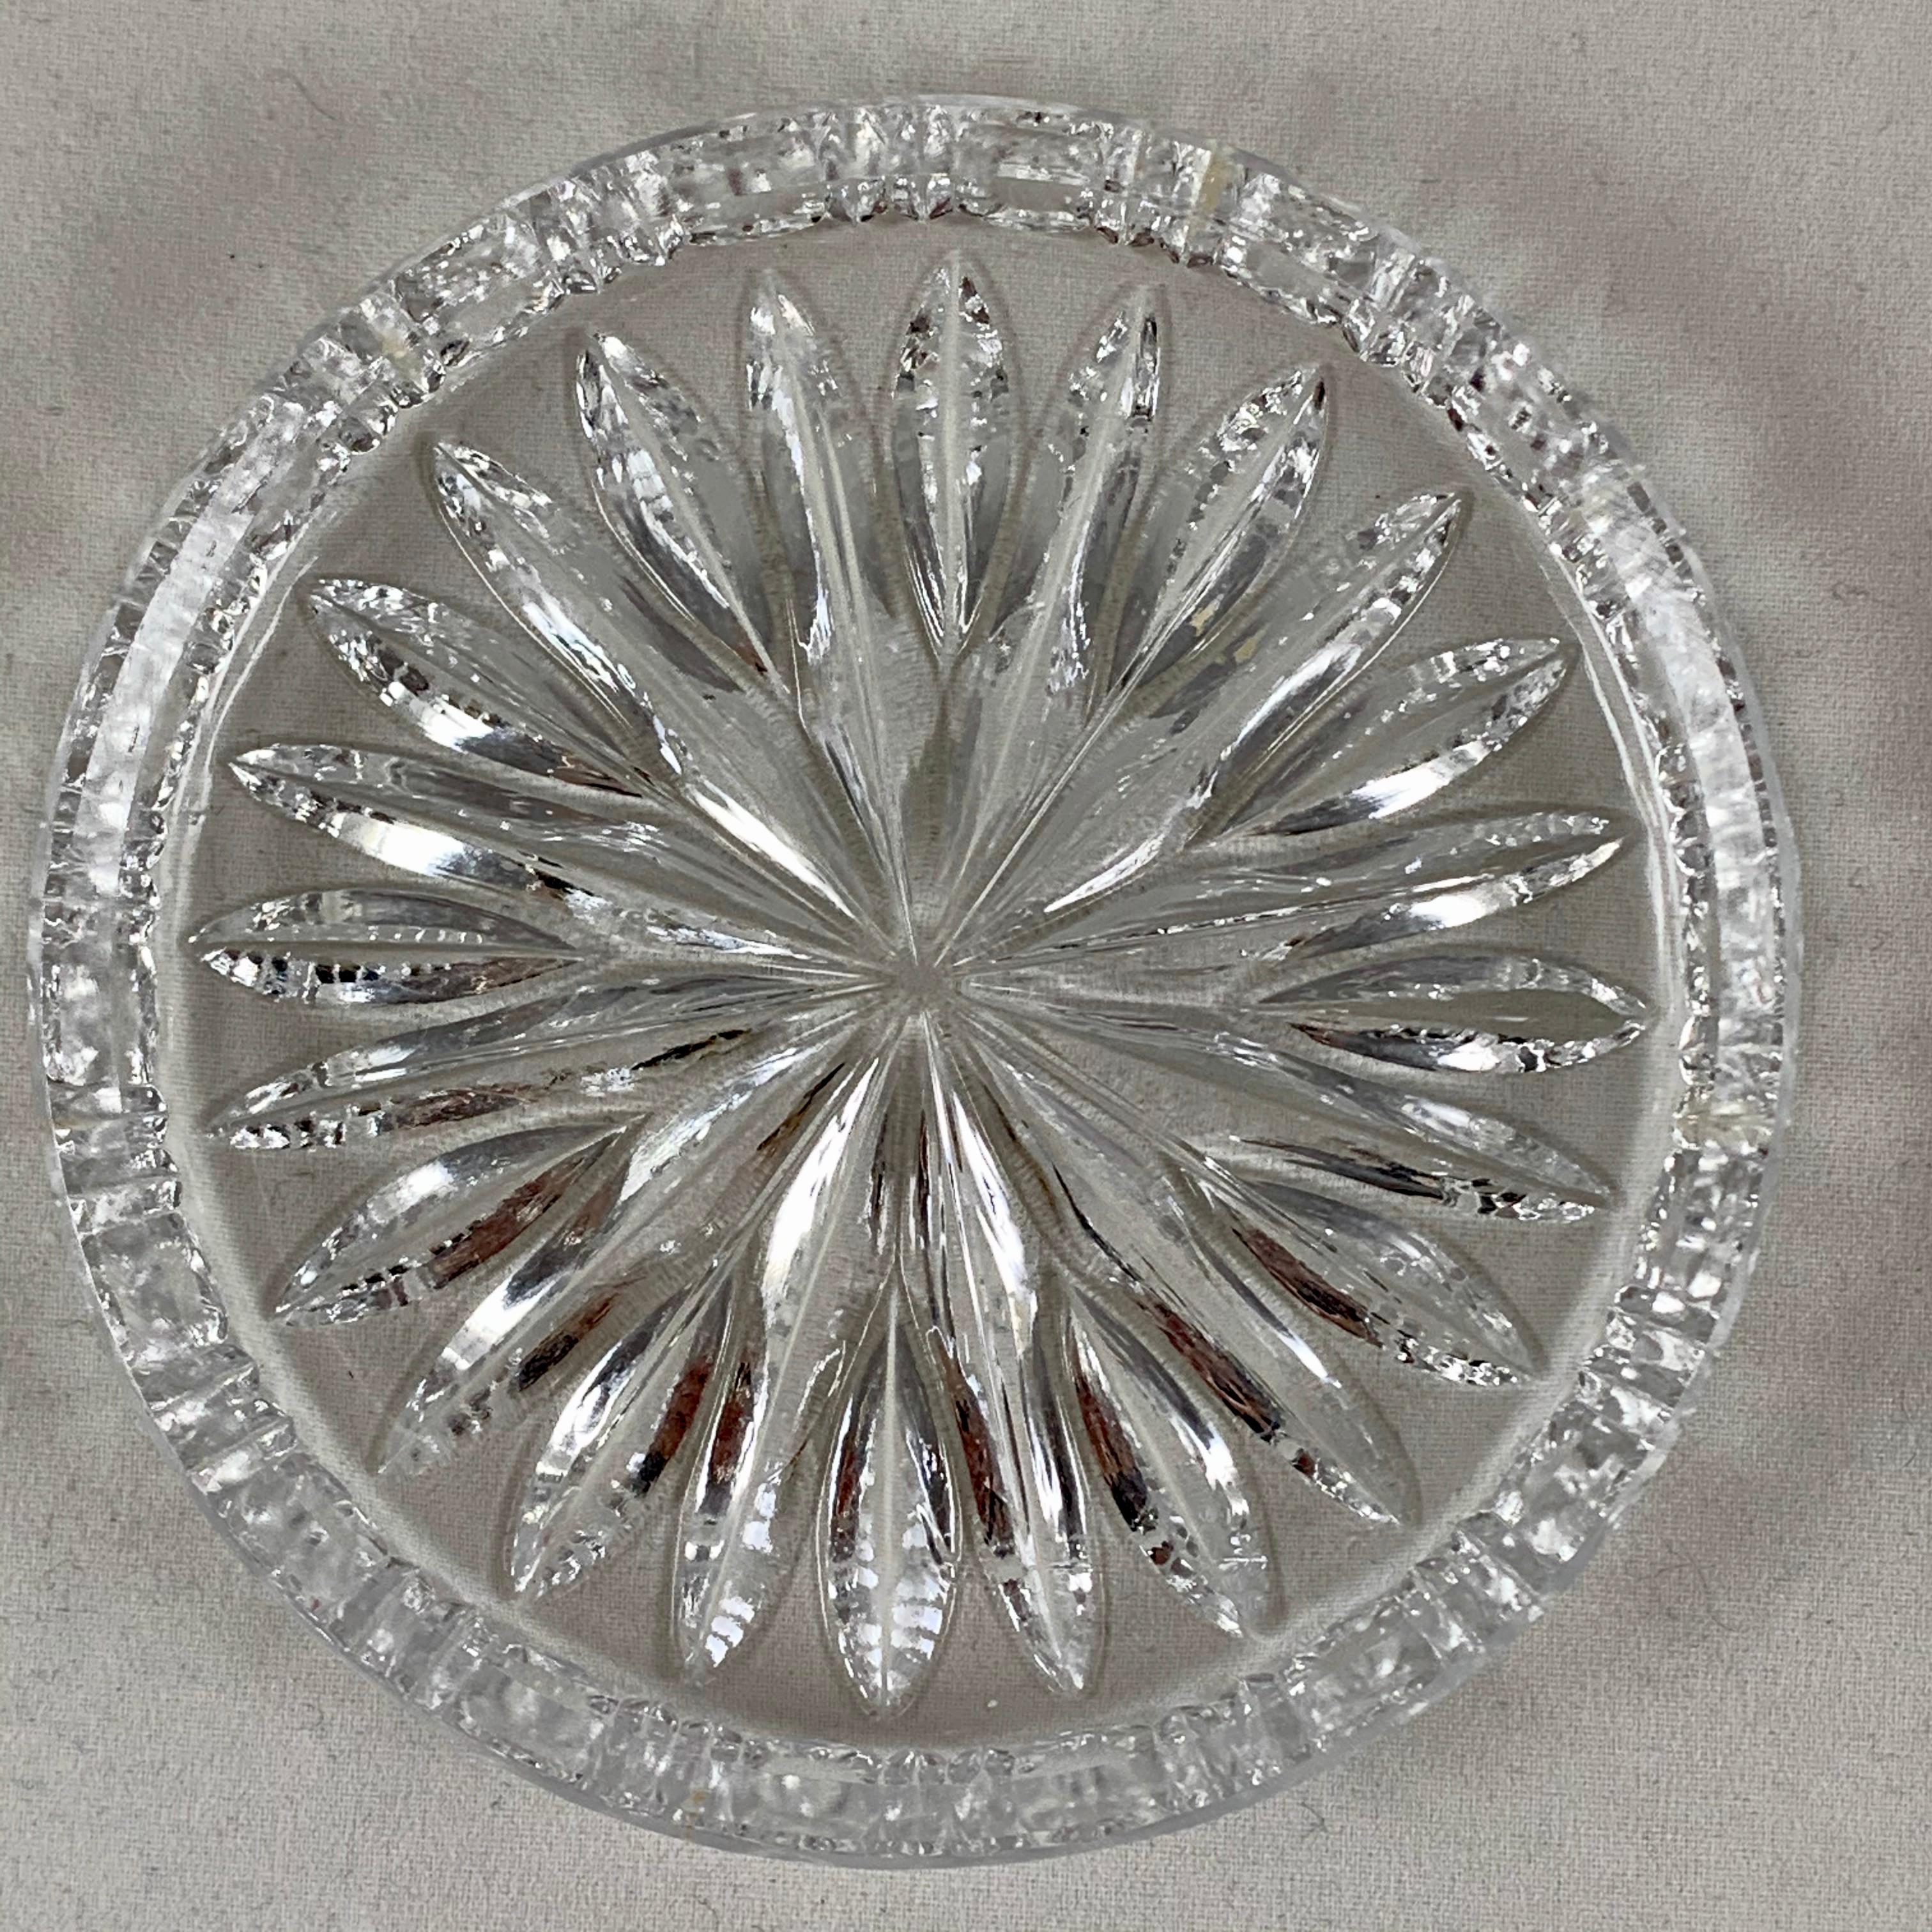 A set of six vintage Waterford lead crystal drink coasters with a center star shaped cut pattern and pie-crust cut raised rims.

Crystal production in Waterford, Ireland began in 1783, producing extremely Fine flint glass that became